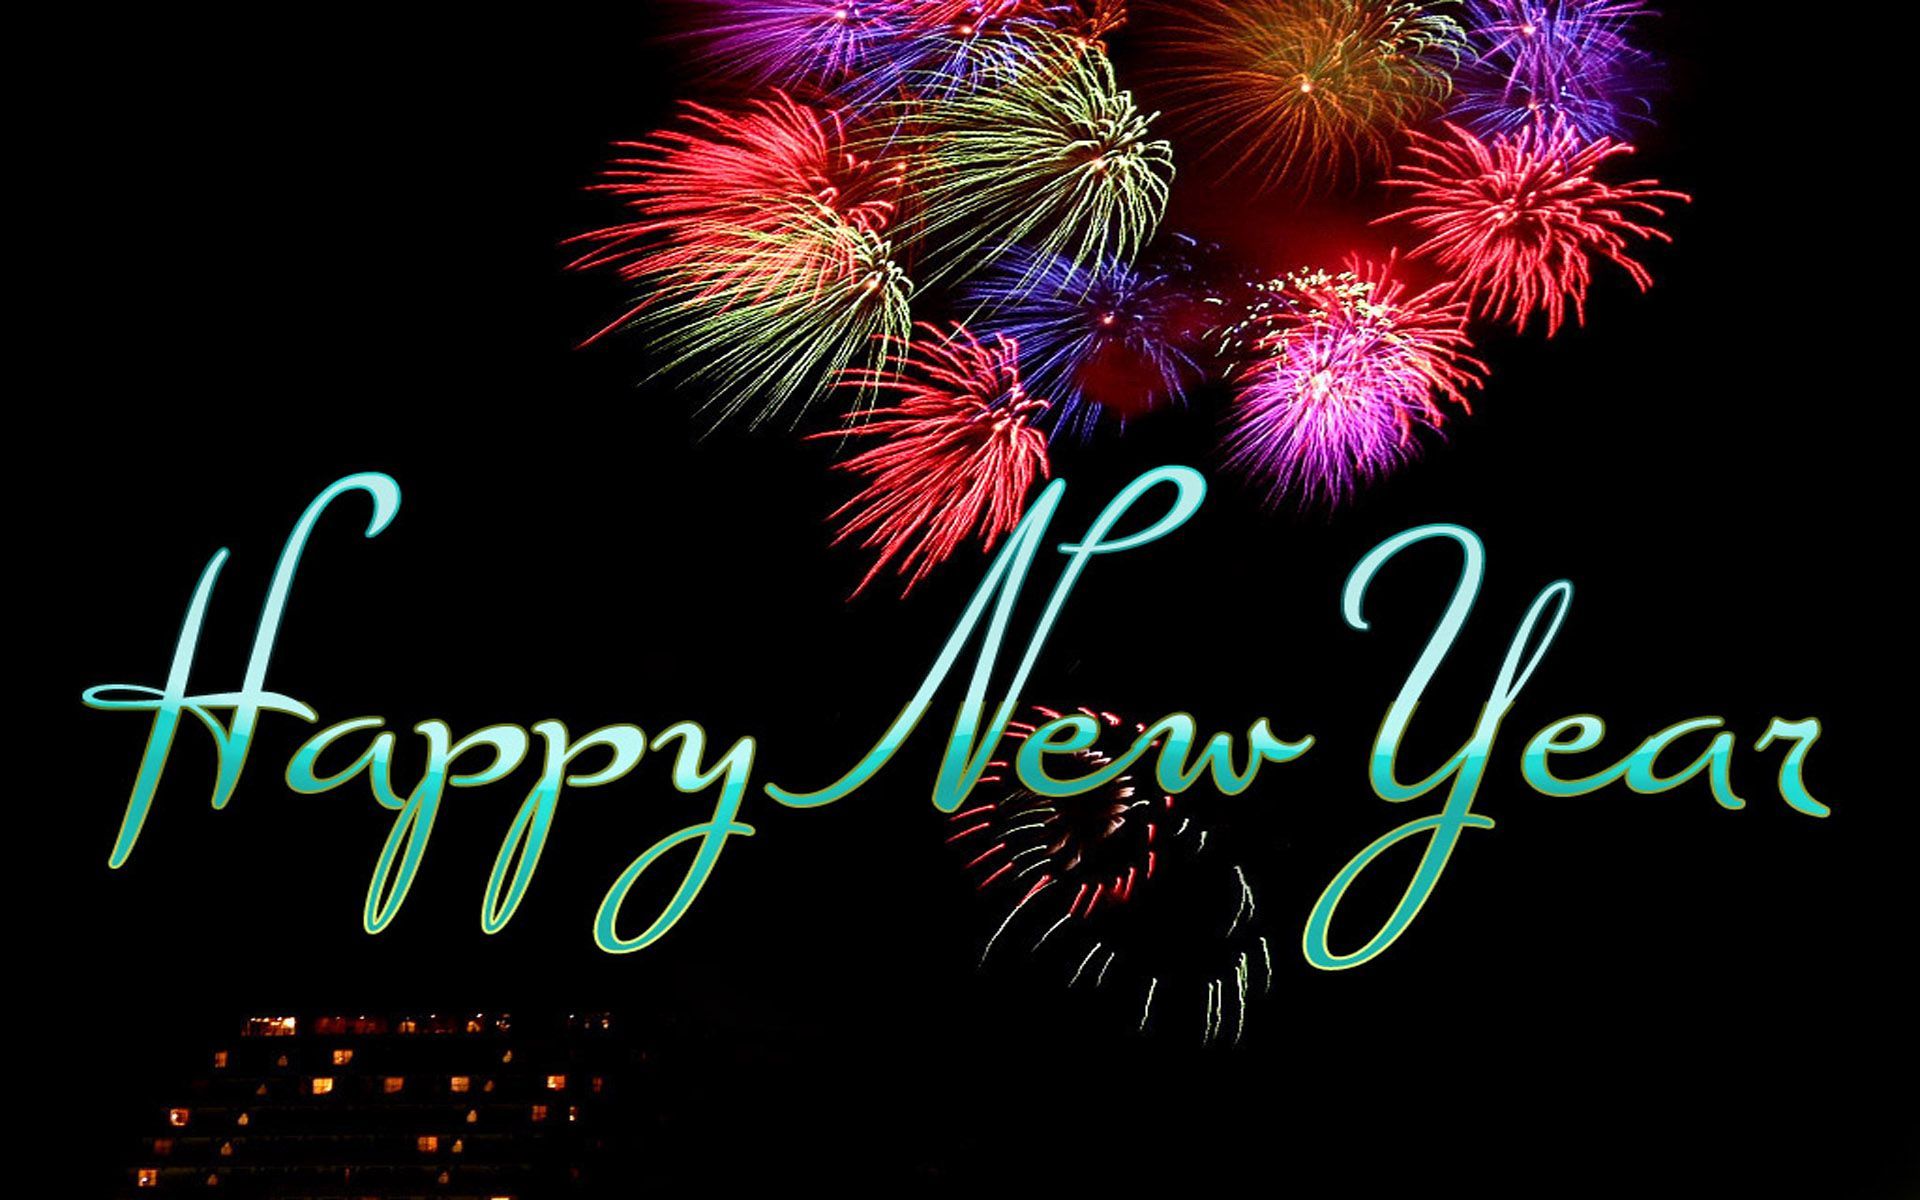 HD Wallpapers New Year